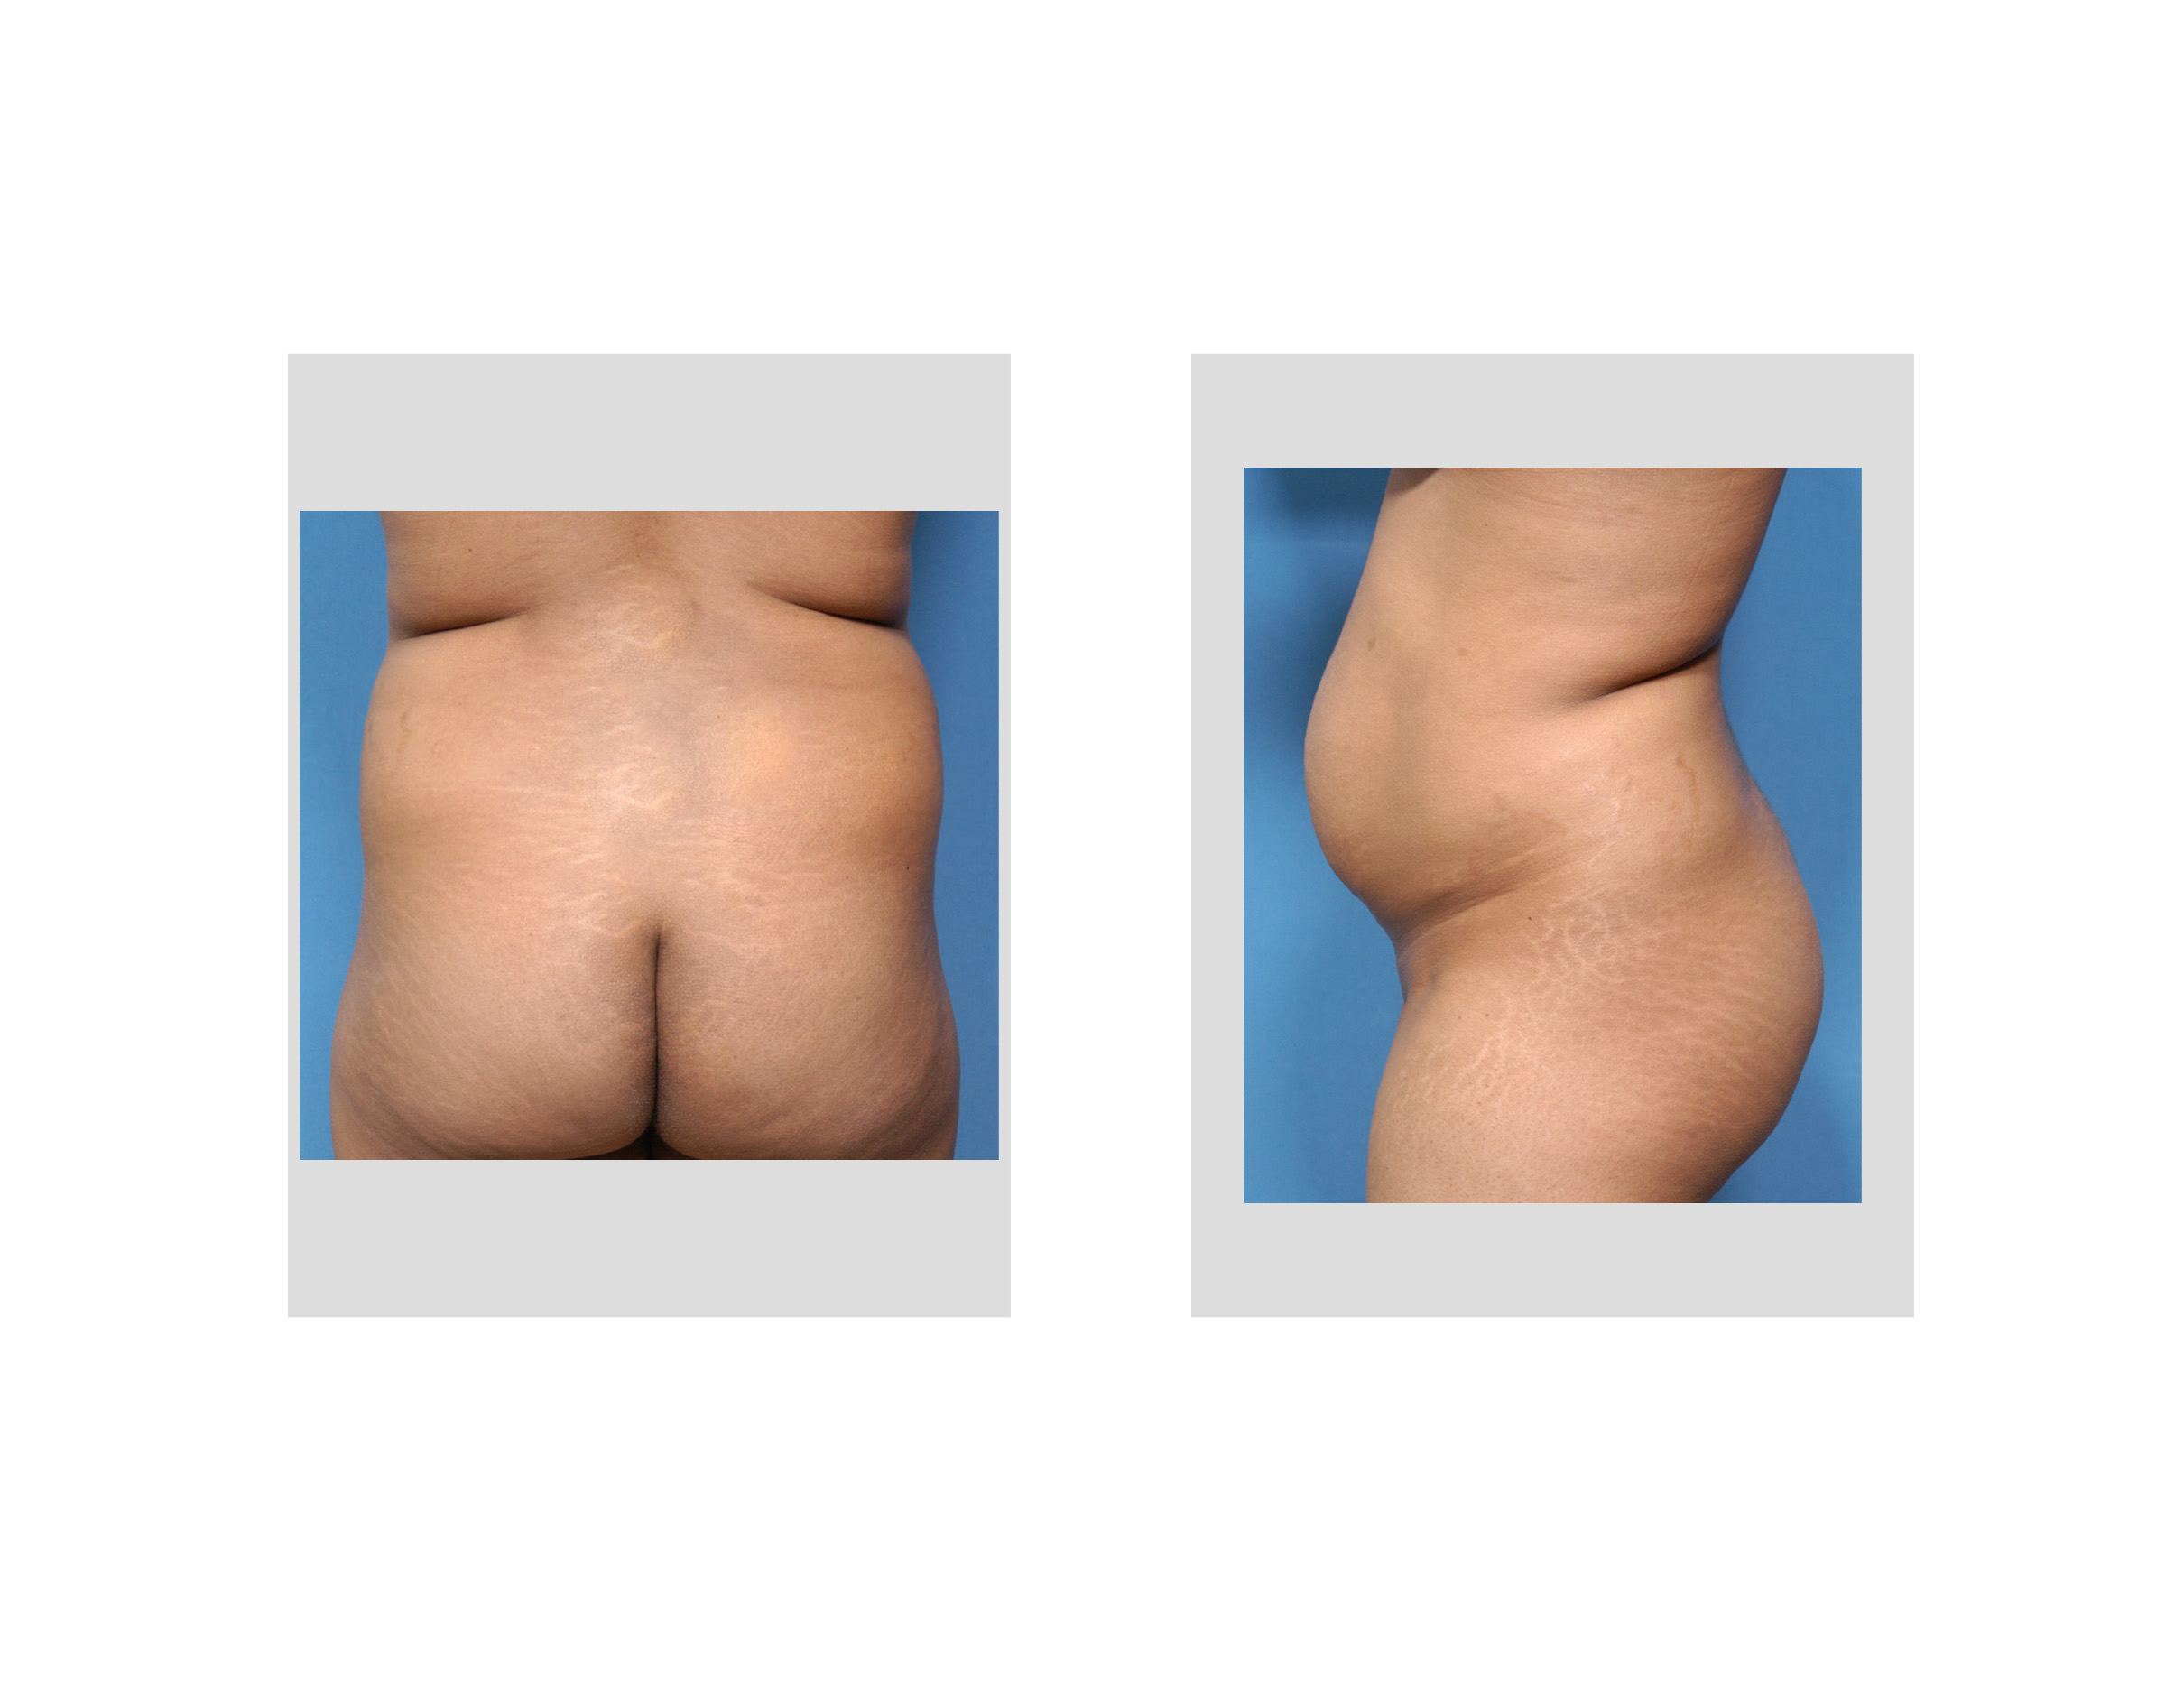 Waistline Reshaping With Muffin Top Liposuction - Explore Plastic Surgery